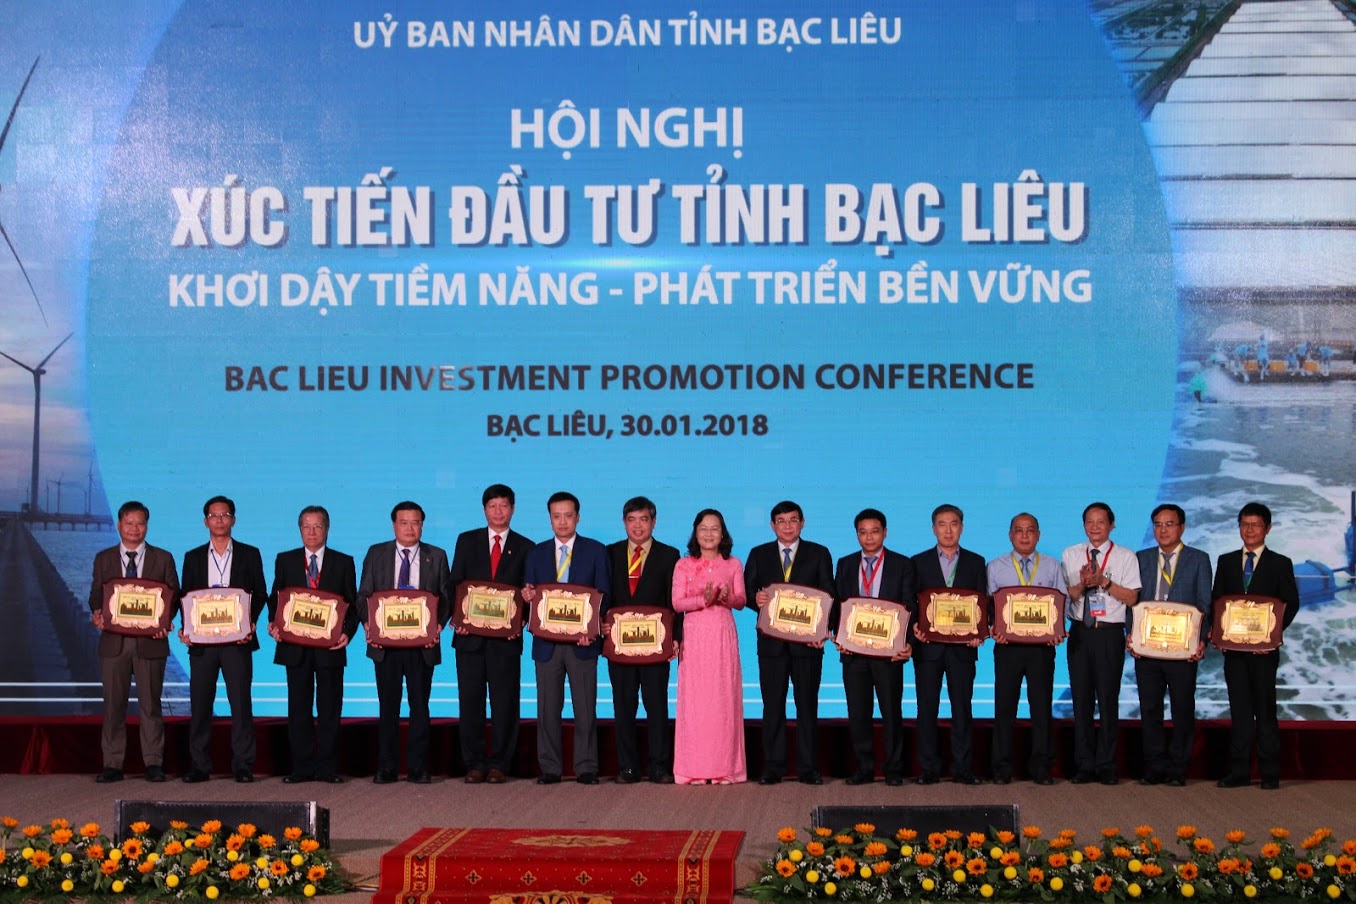 Enterprises to receive investment certificates at Bac Lieu Investment Promotion Conference